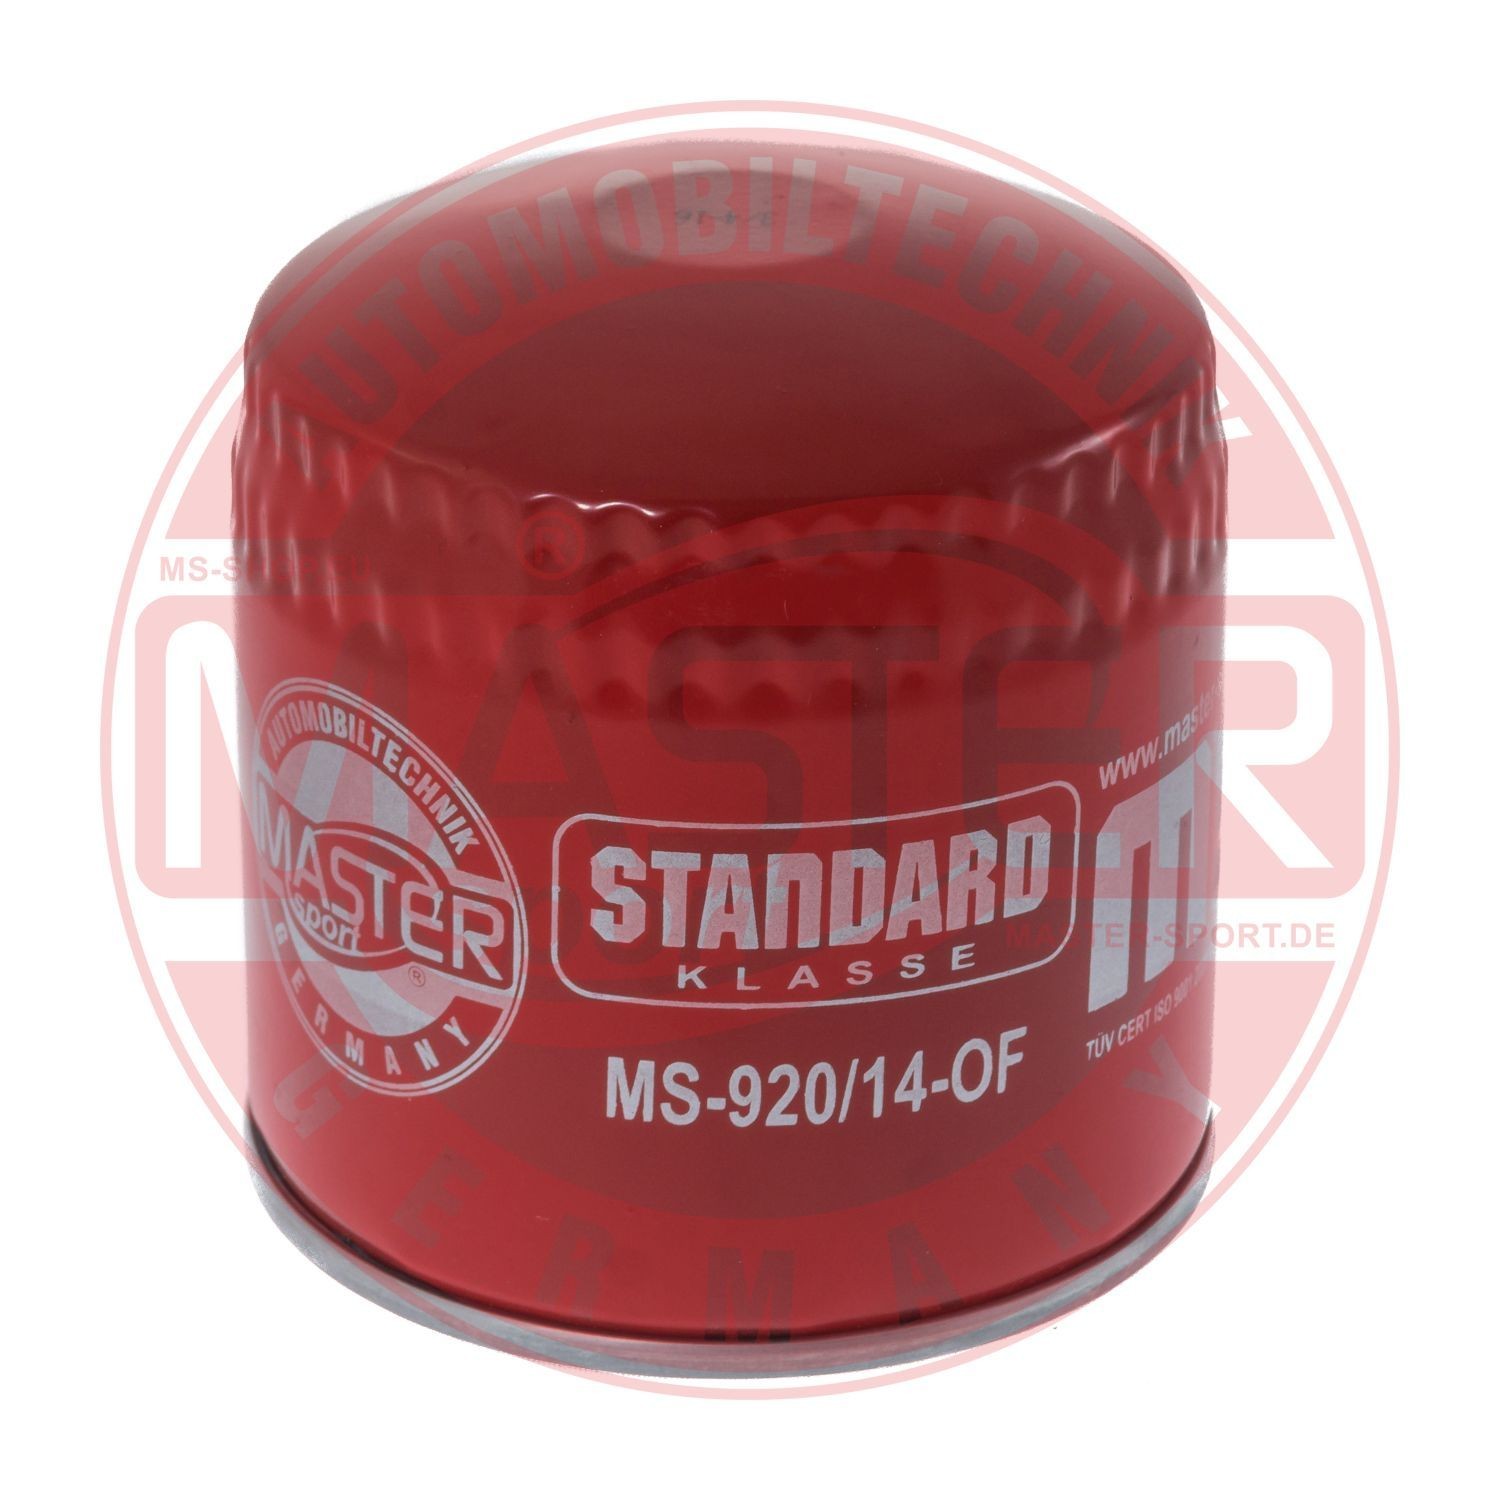 MASTER-SPORT 920/14-OF-PCS-MS Oil filter 3/4-16 UNF, with one anti-return valve, Filter Insert